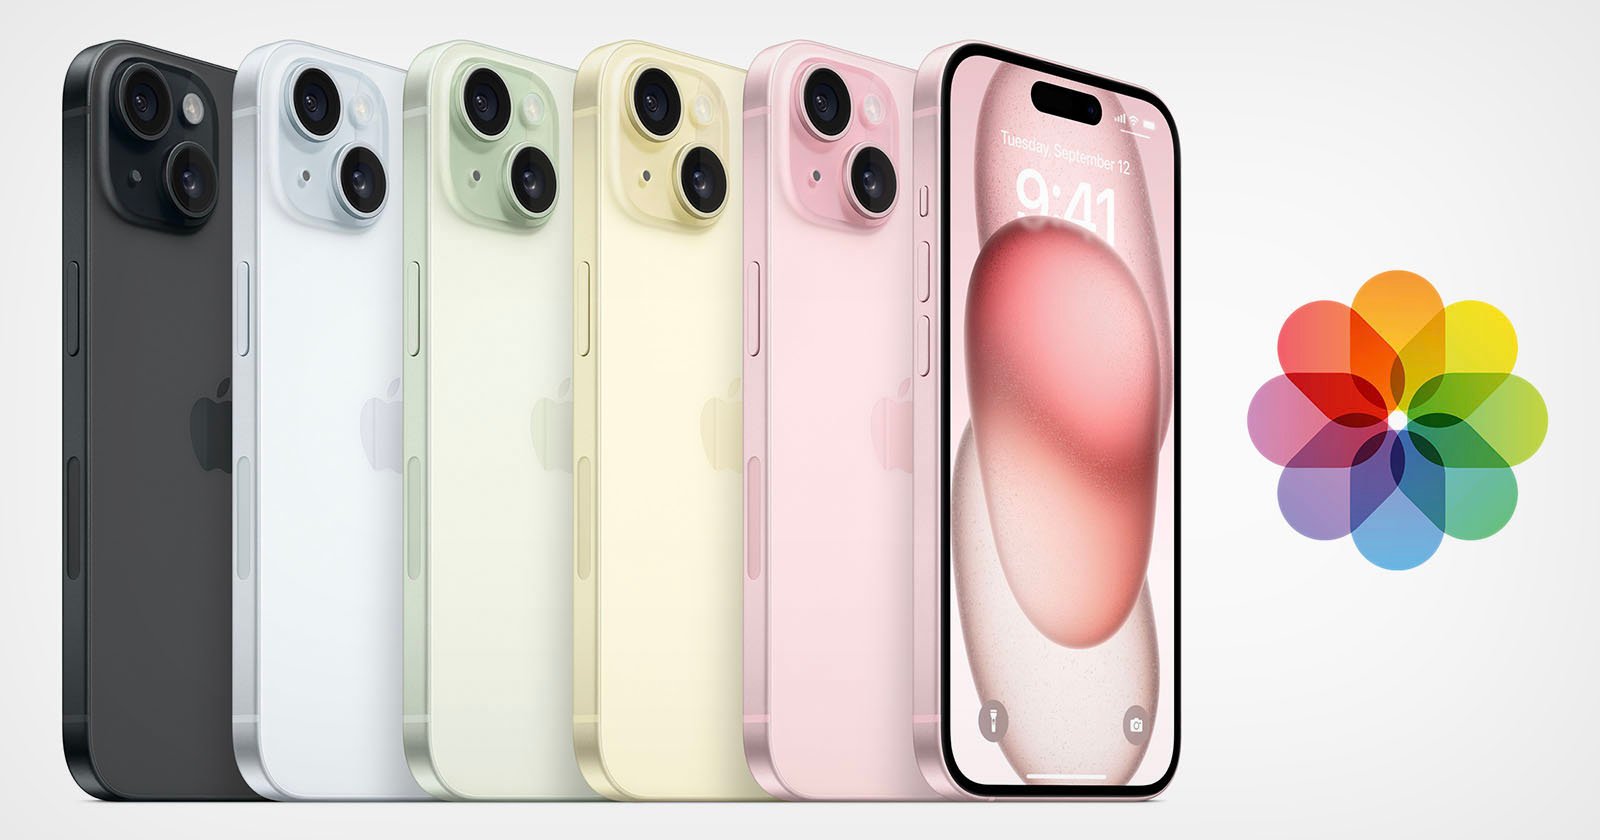 The image shows five iPhone 15 models lined up side by side in different colors: black, blue, yellow, pink, and white. Each phone has a sleek design, and one displays the home screen. A colorful flower-like icon is shown on the right side.